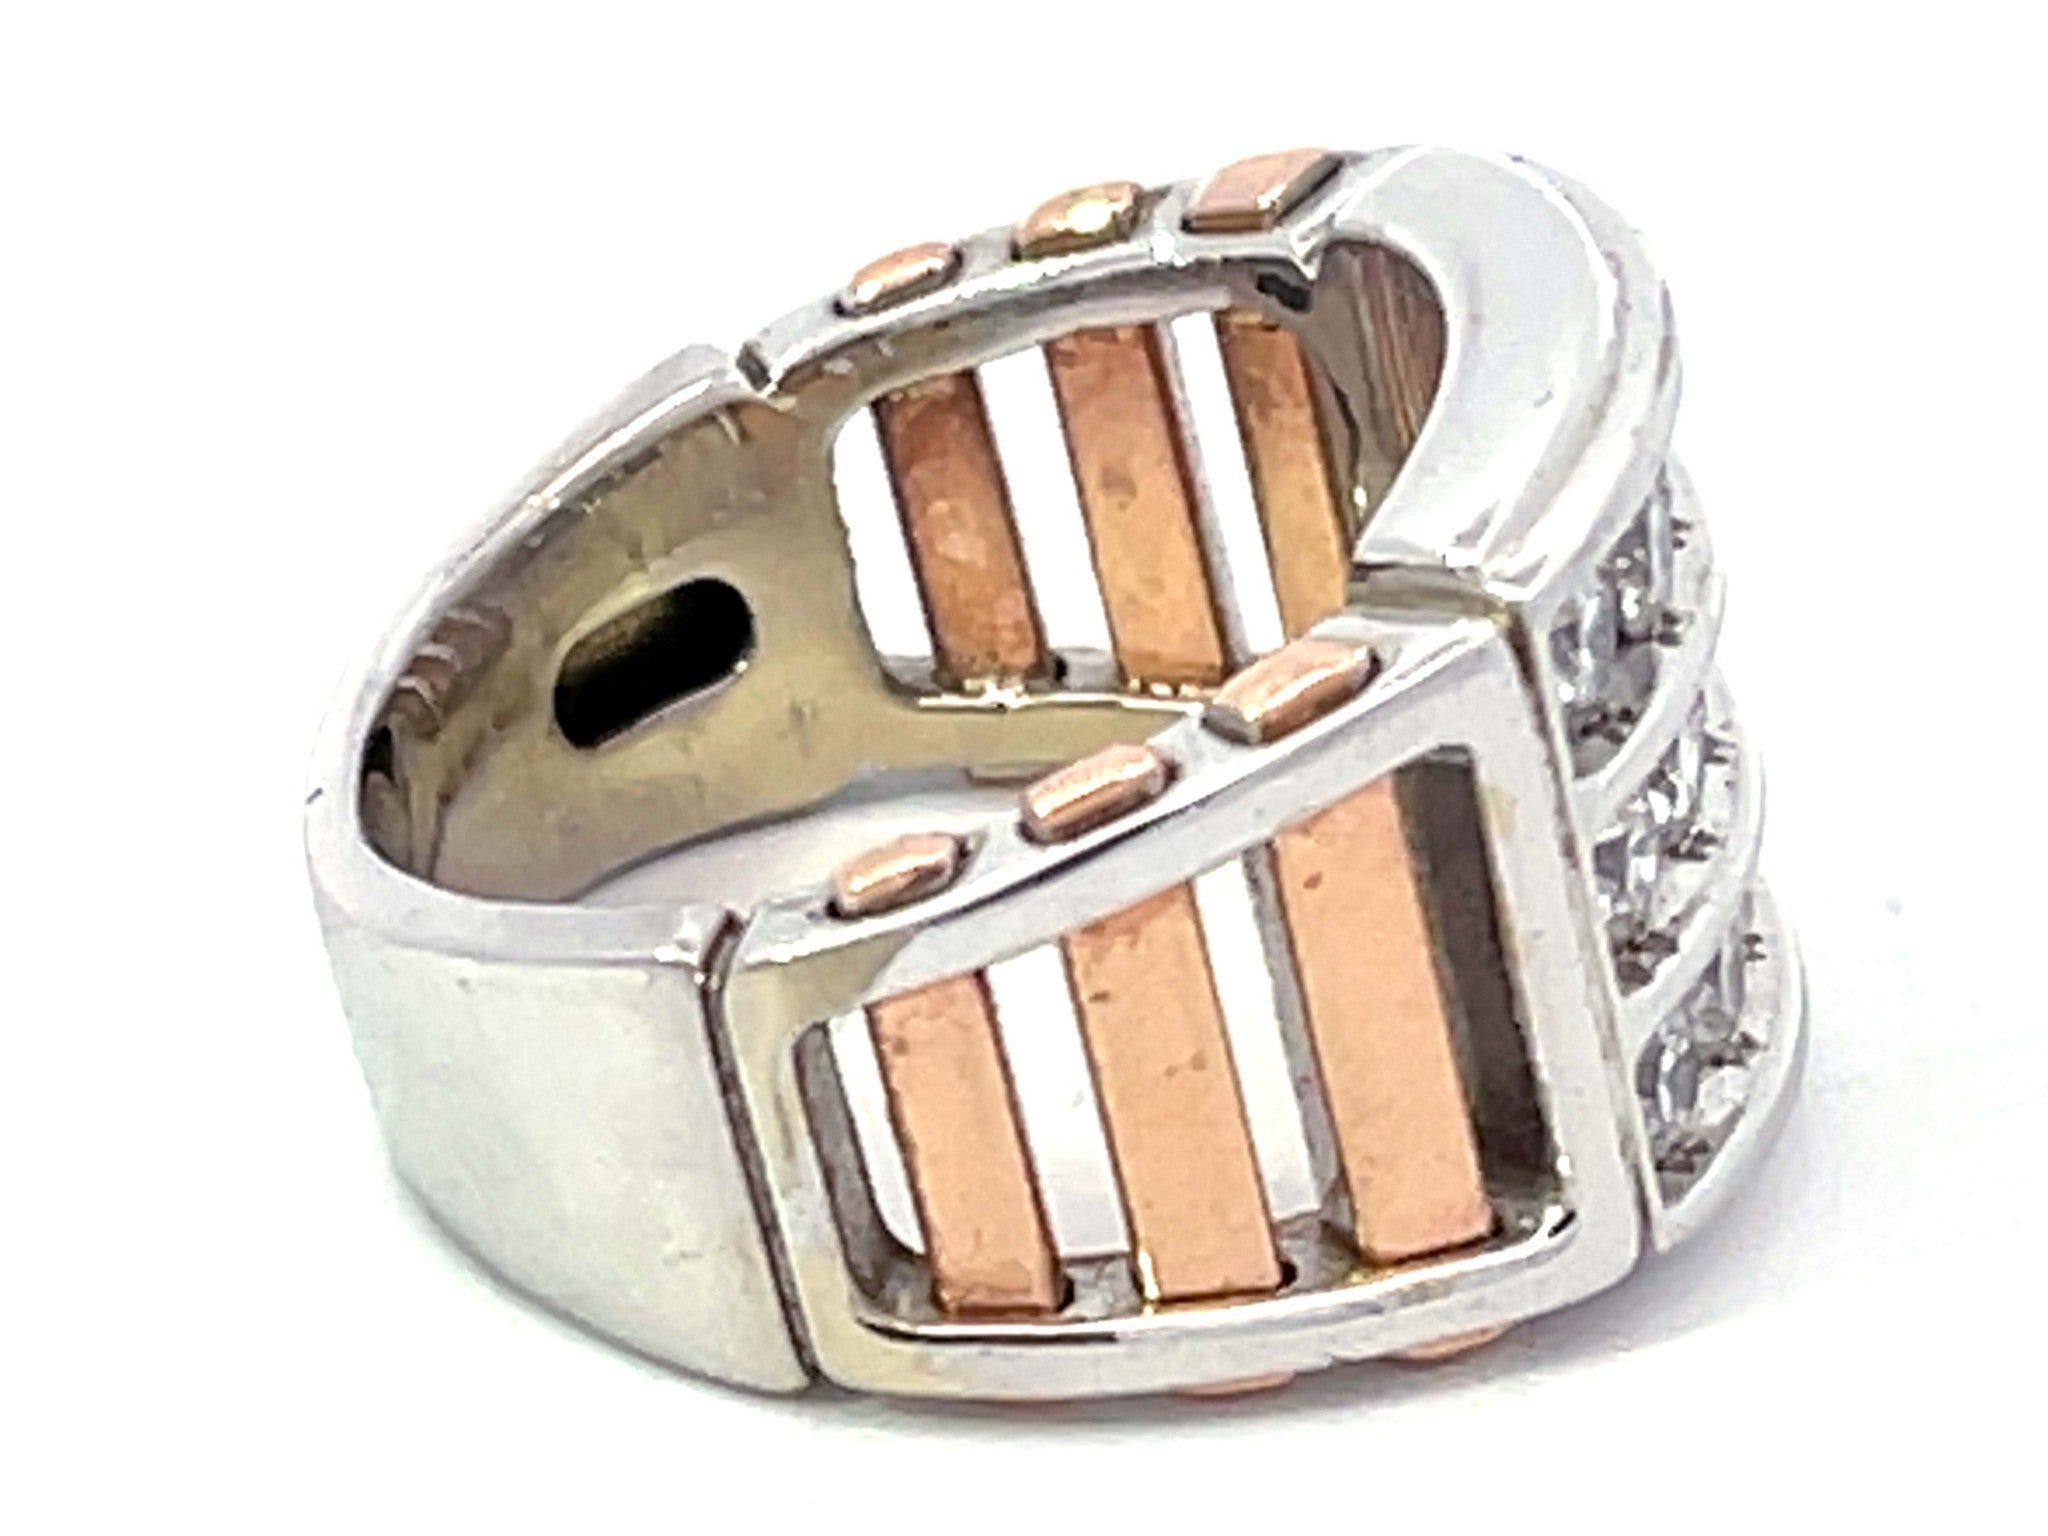 Two Toned 3 Diamond Row Ring in 14k White and Rose Gold